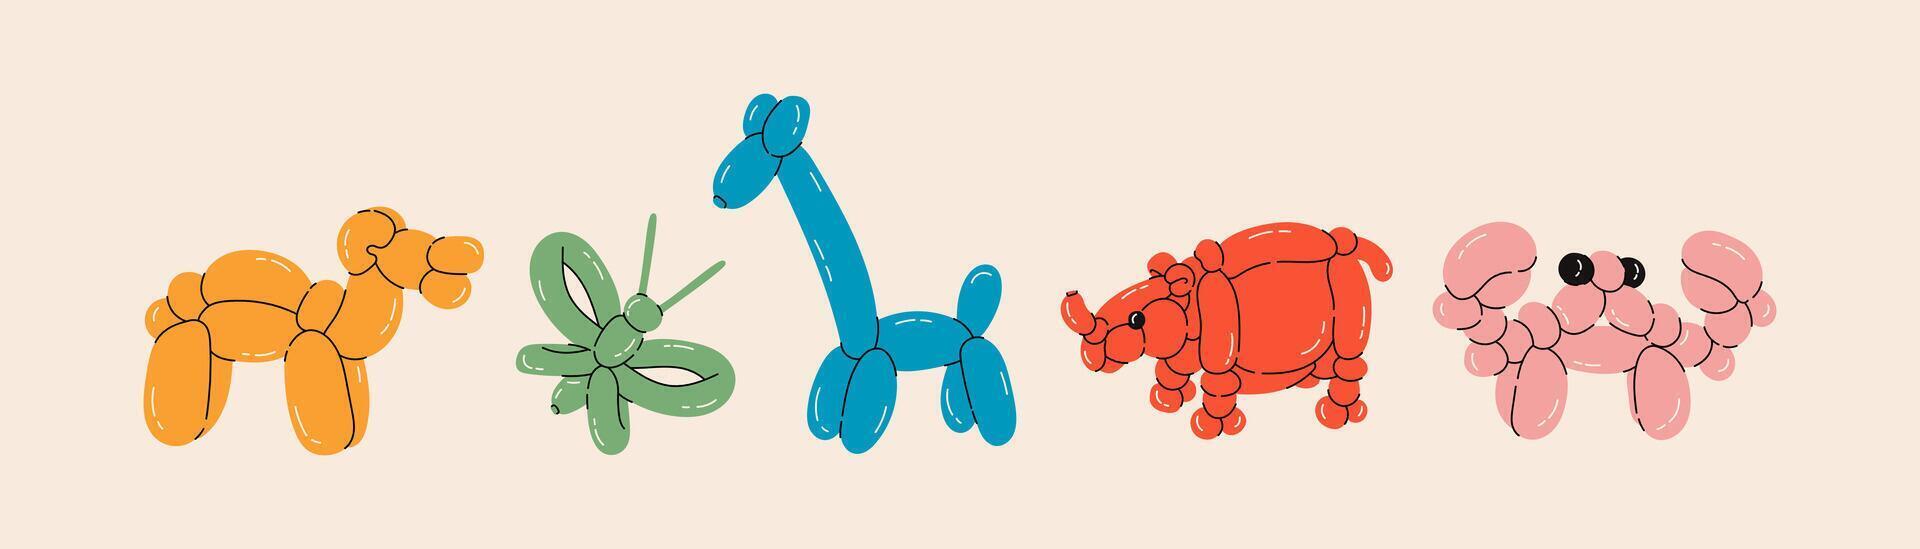 Set of balloon animals, Camel, Butterfly, Giraffe, Rhino, Crab. Birthday celebration party. Fancy abstract characters isolated vector. Colorful drawing of inflatable toys made of twisted balloons vector